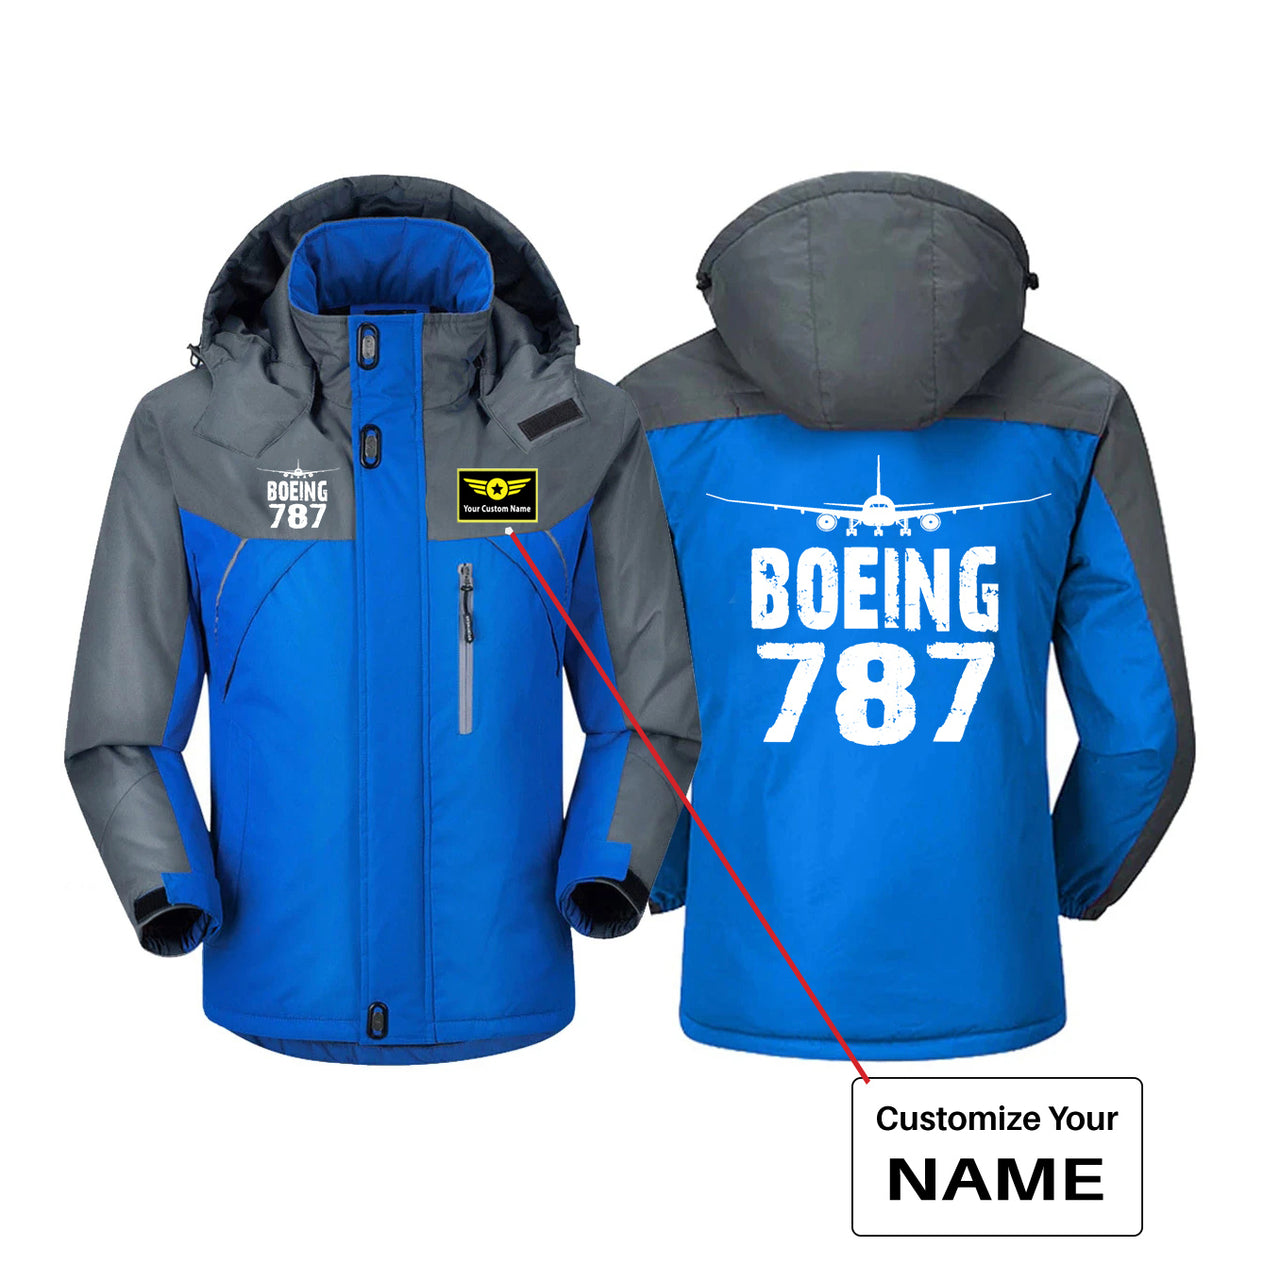 Boeing 787 & Plane Designed Thick Winter Jackets